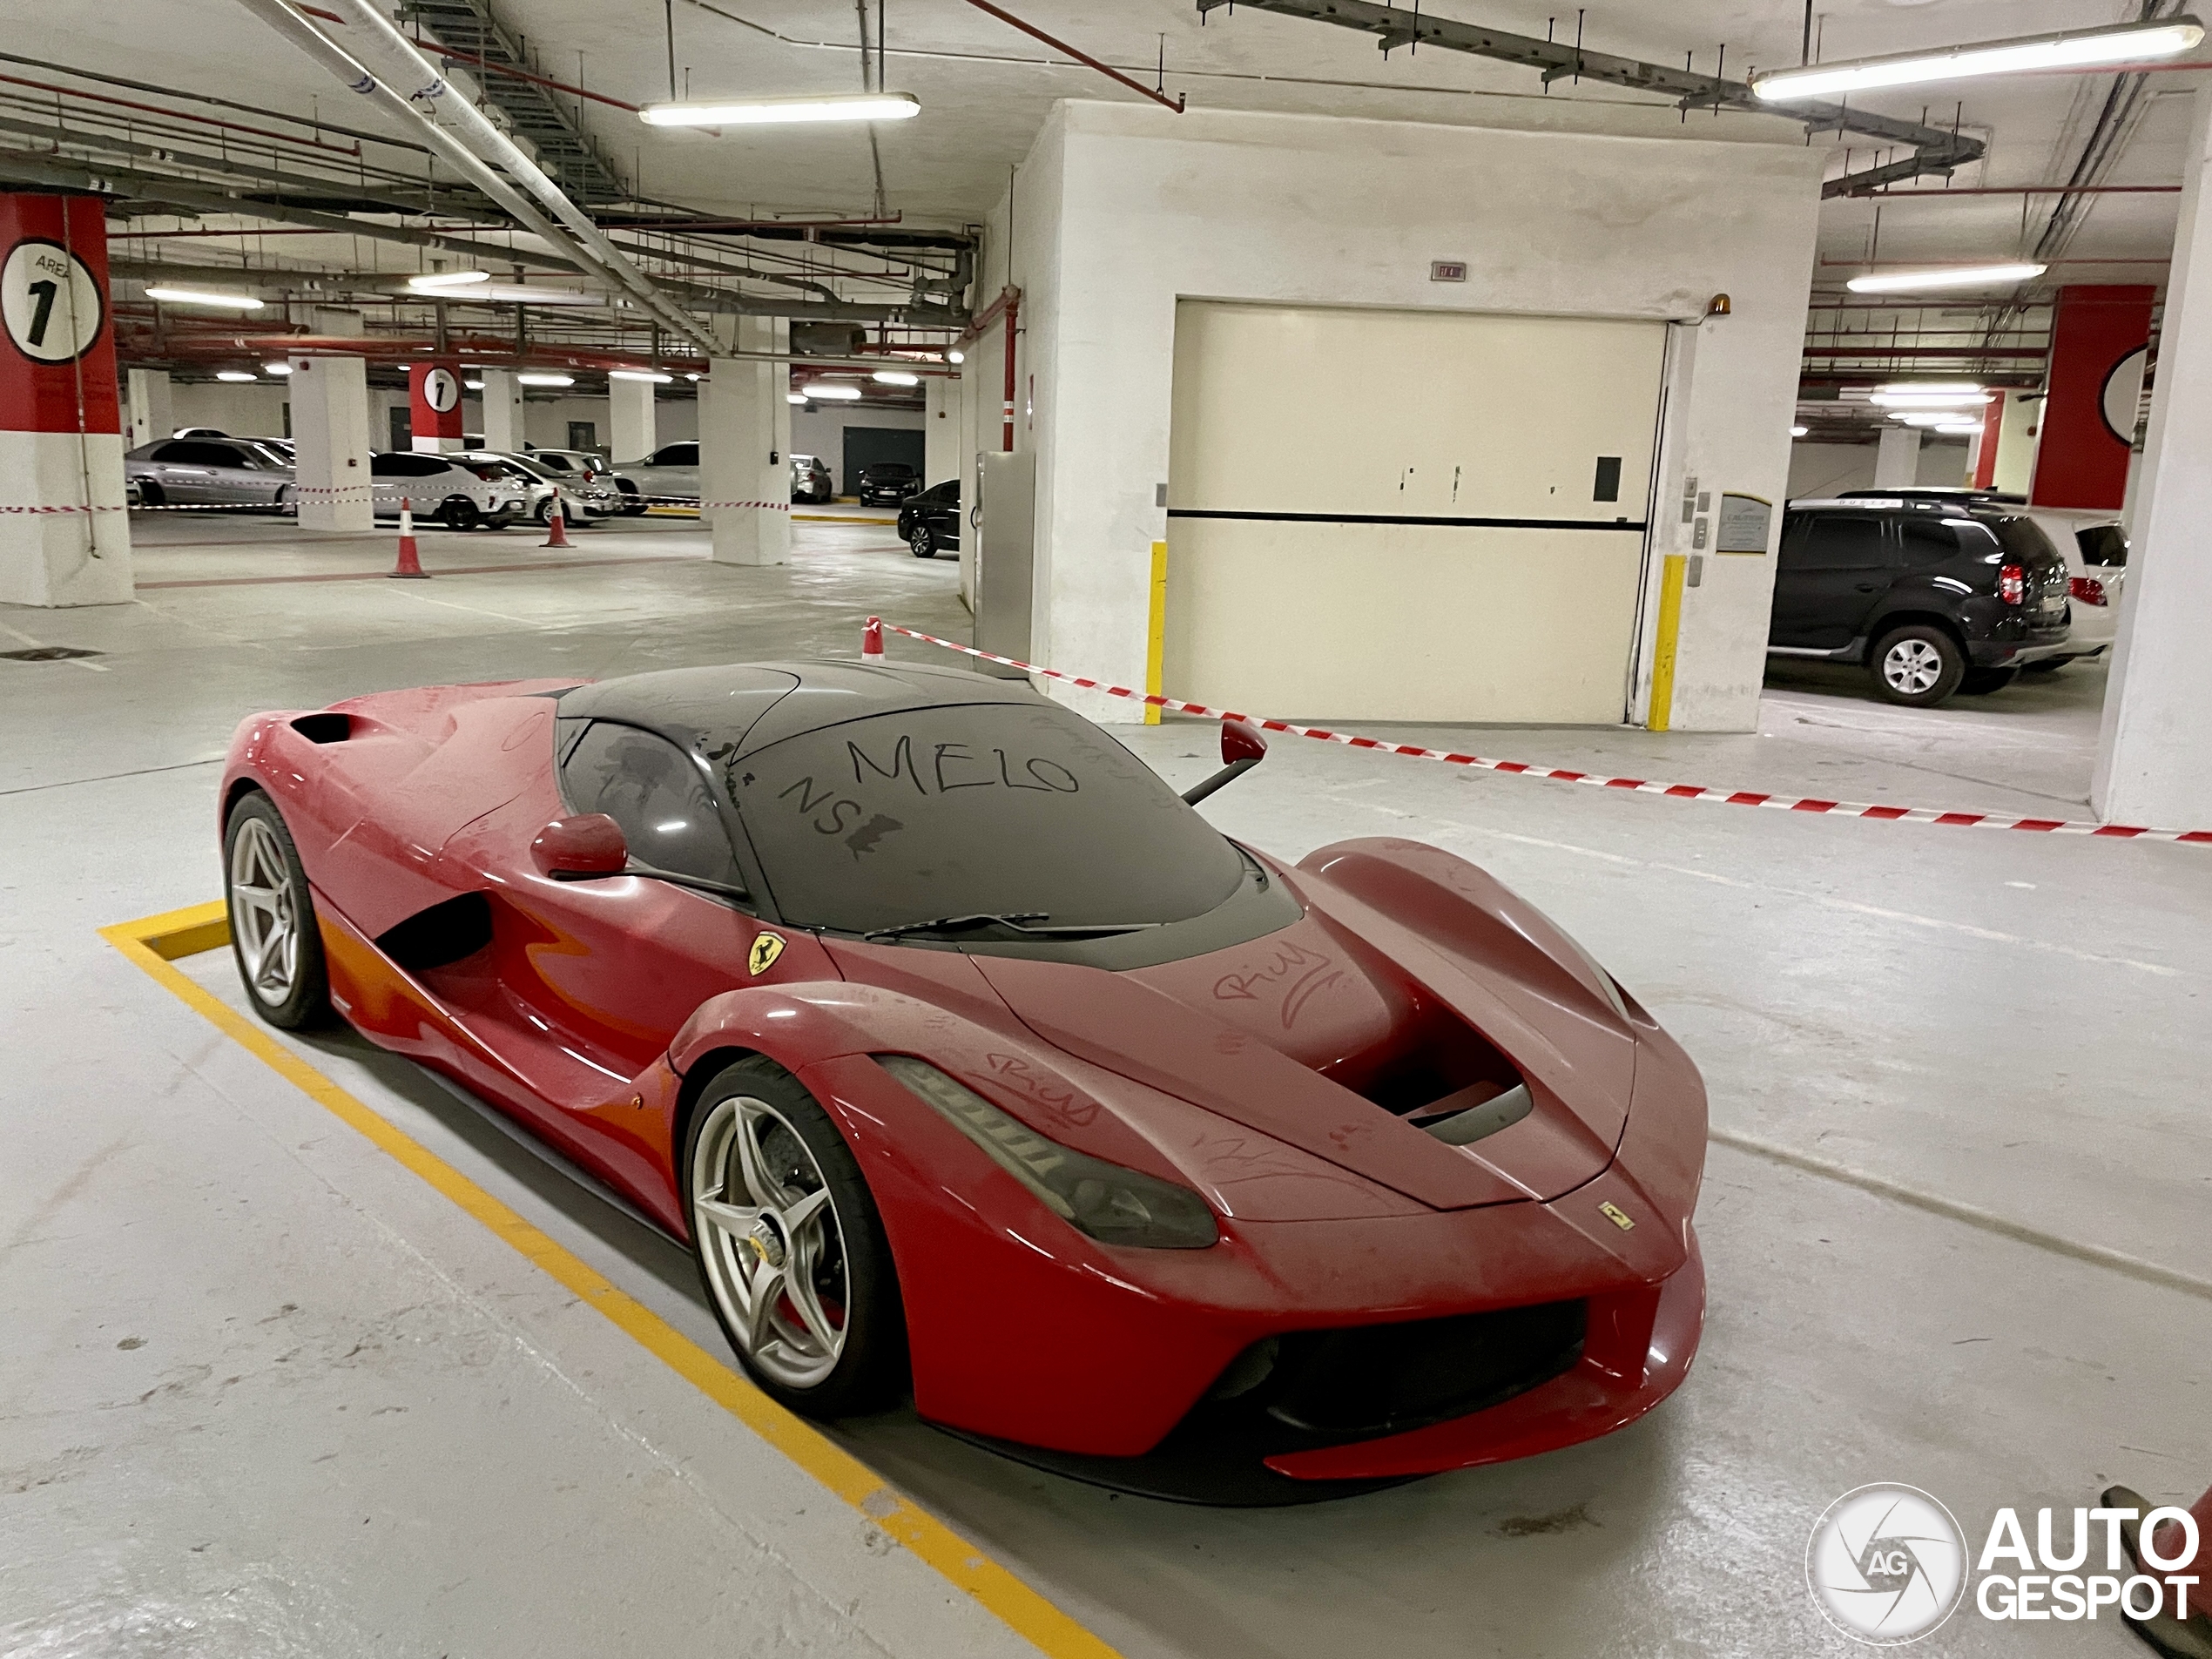 Do we see a neglected Laferrari here?